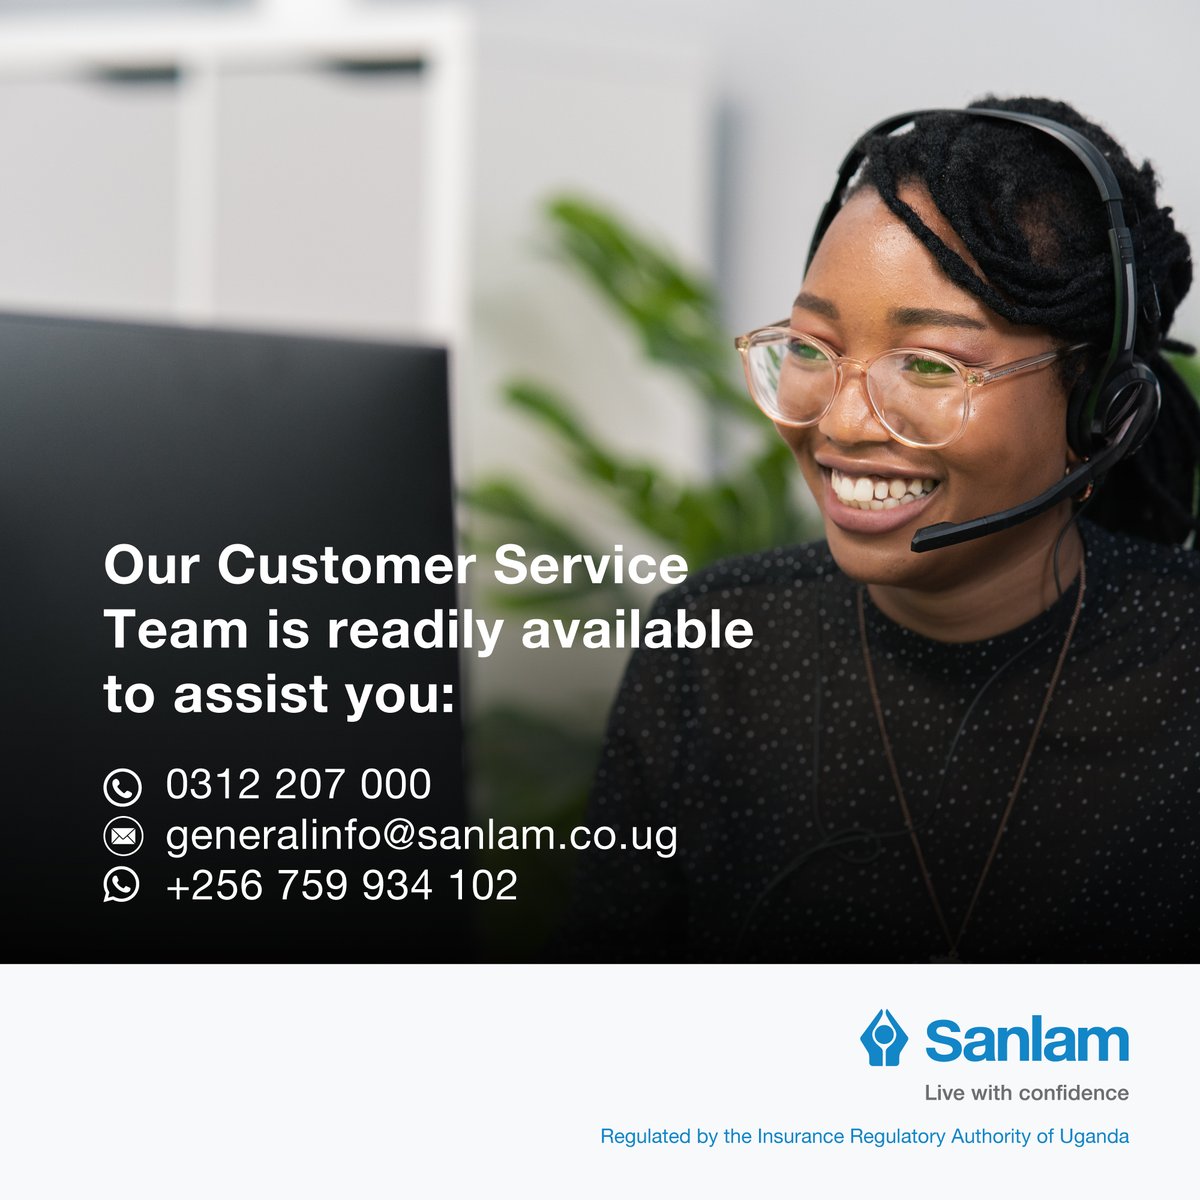 Greetings Friends, how can our team assist you today? #ConfidenceInService